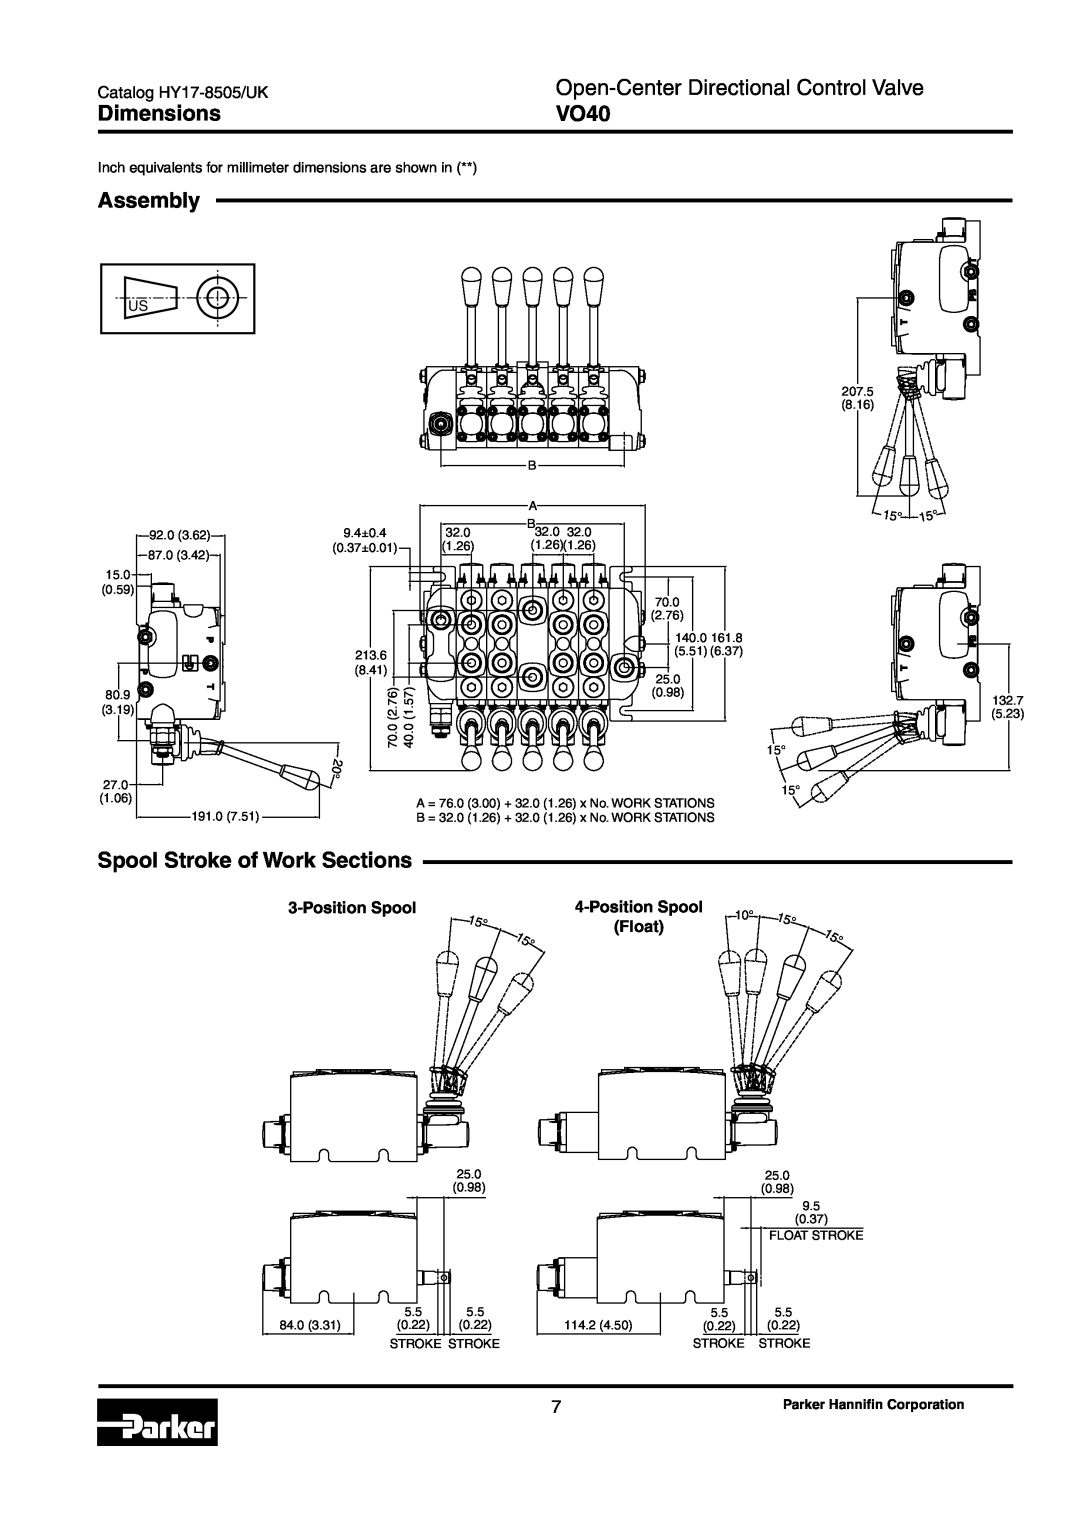 Parker Hannifin VO40 manual Dimensions, Assembly, Spool Stroke of Work Sections, Open-Center Directional Control Valve 